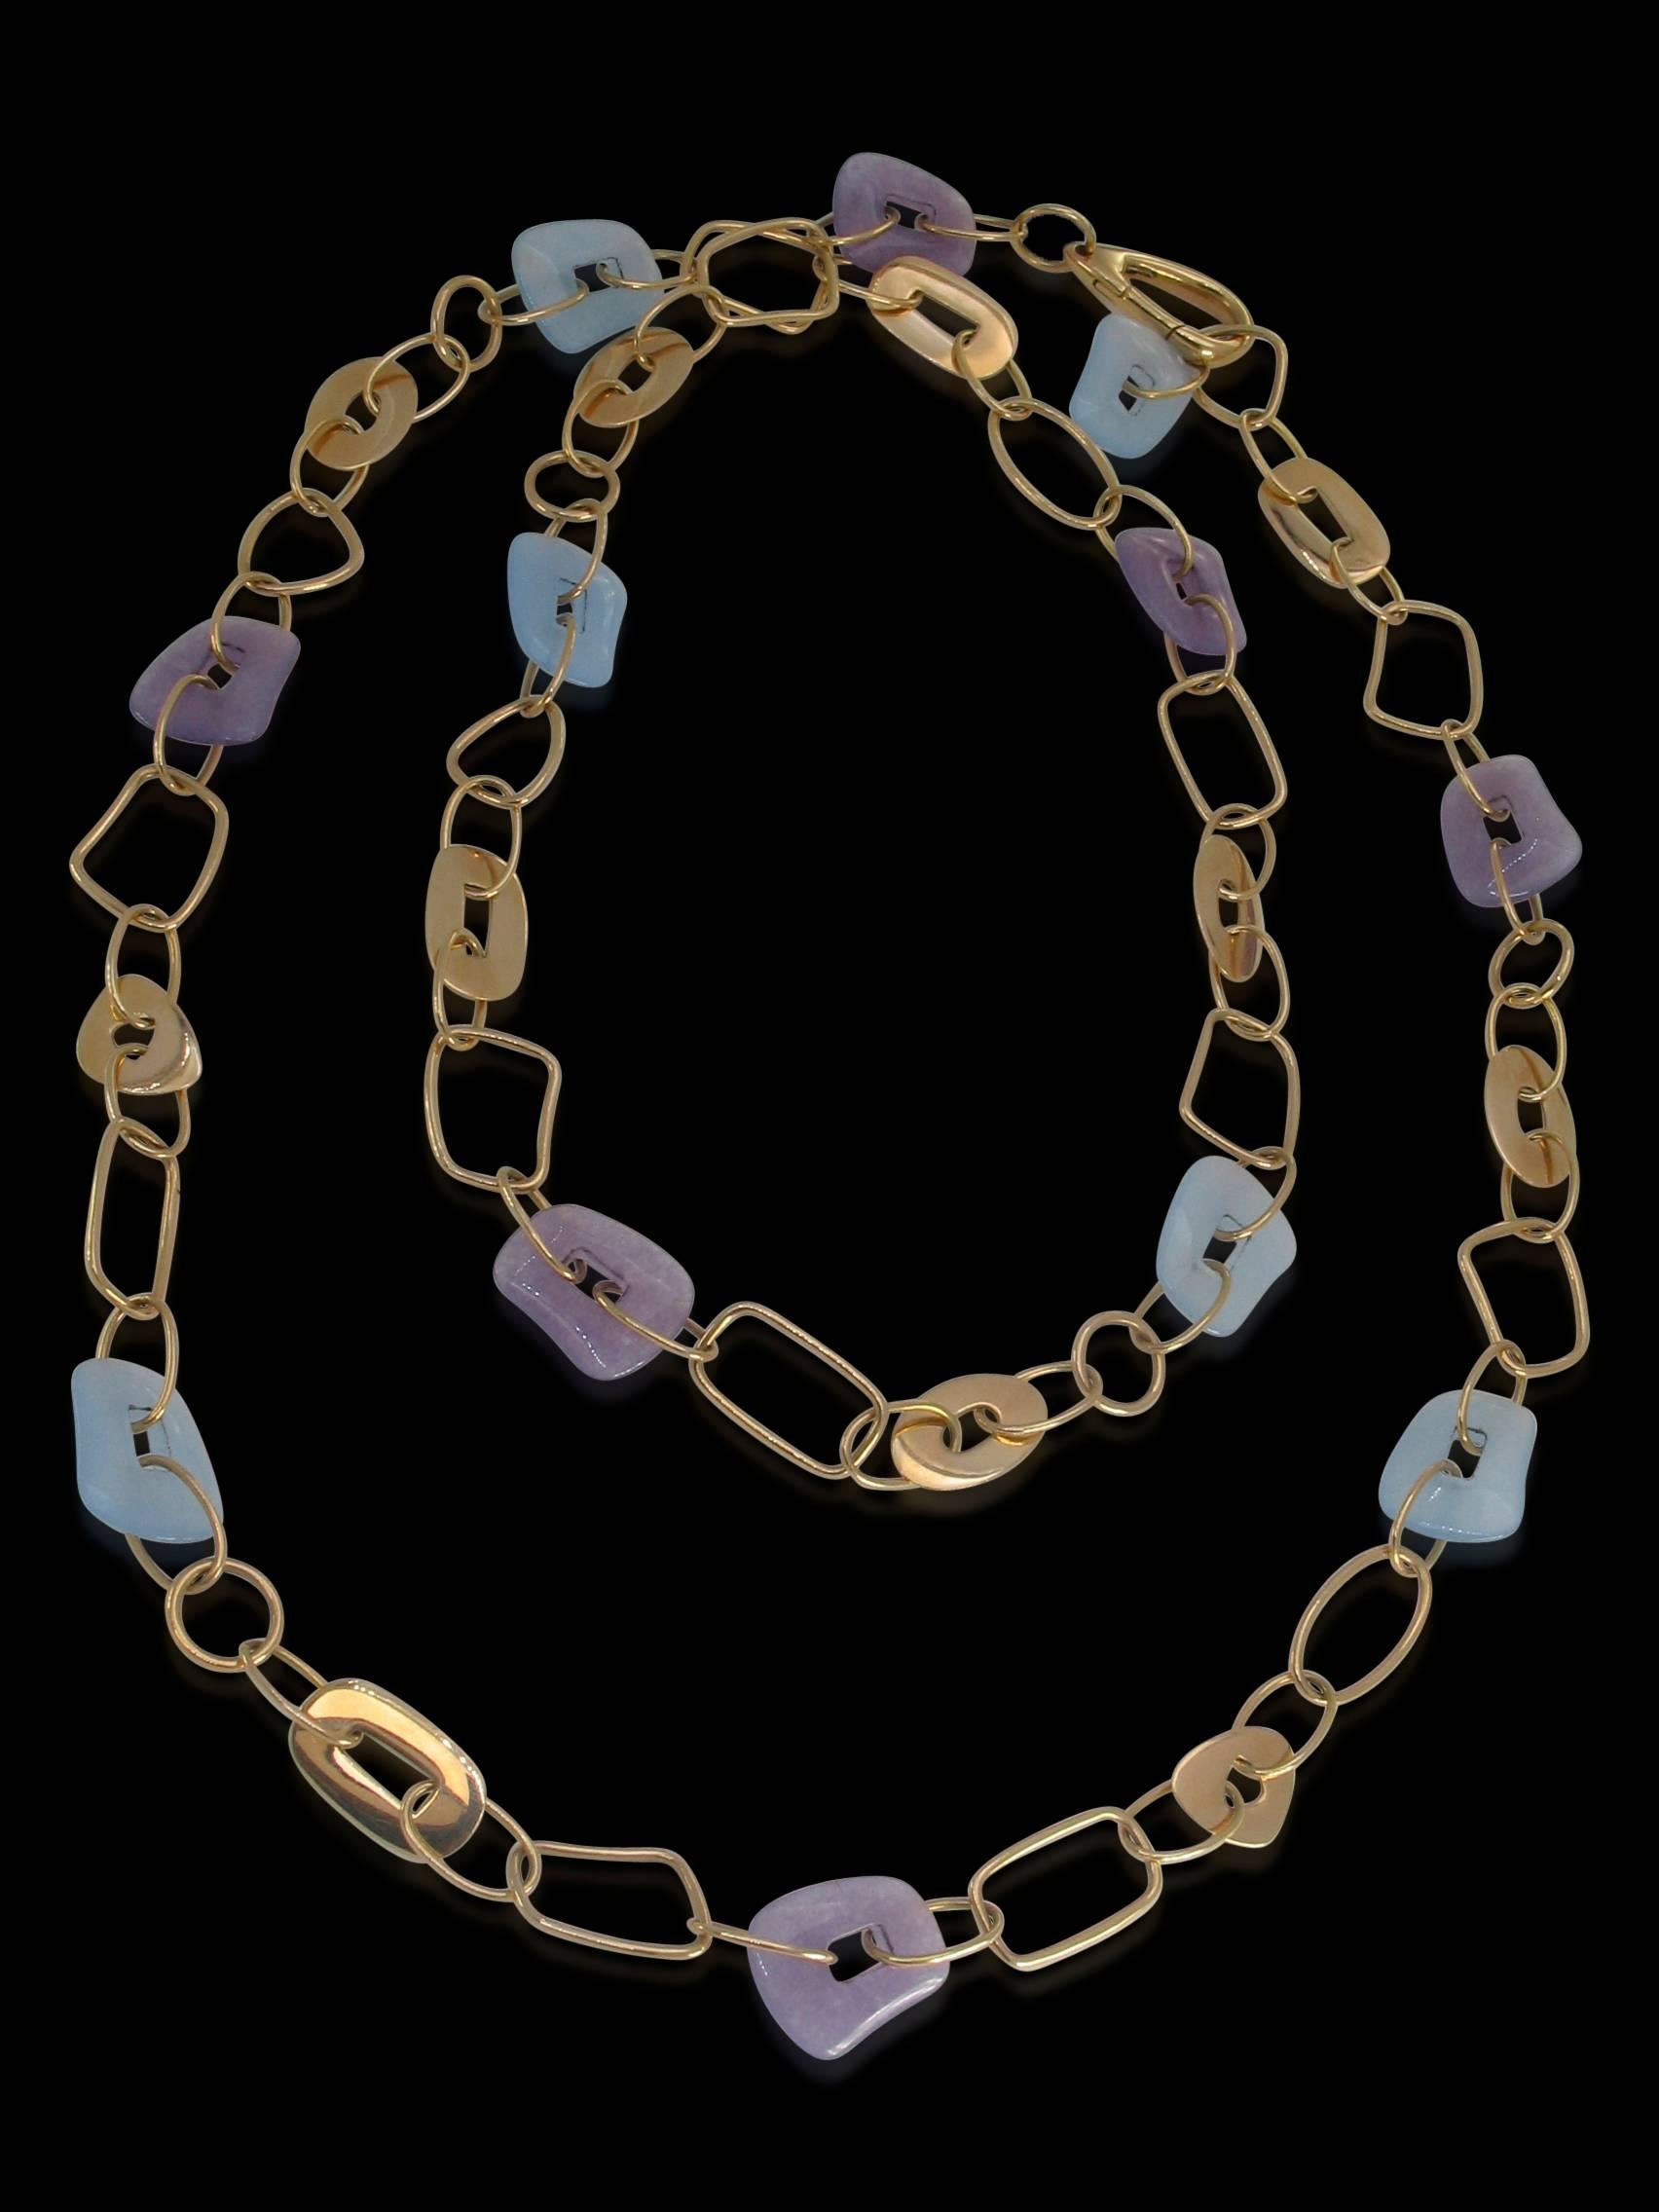 From the Puzzle Collection by Mattioli, this necklace blends inspiration both from abstract art and the 70s. Suitable for almost every occasion, this 18K rose gold necklace features blue and lavender jade enhancers and a clasp to wear as a single